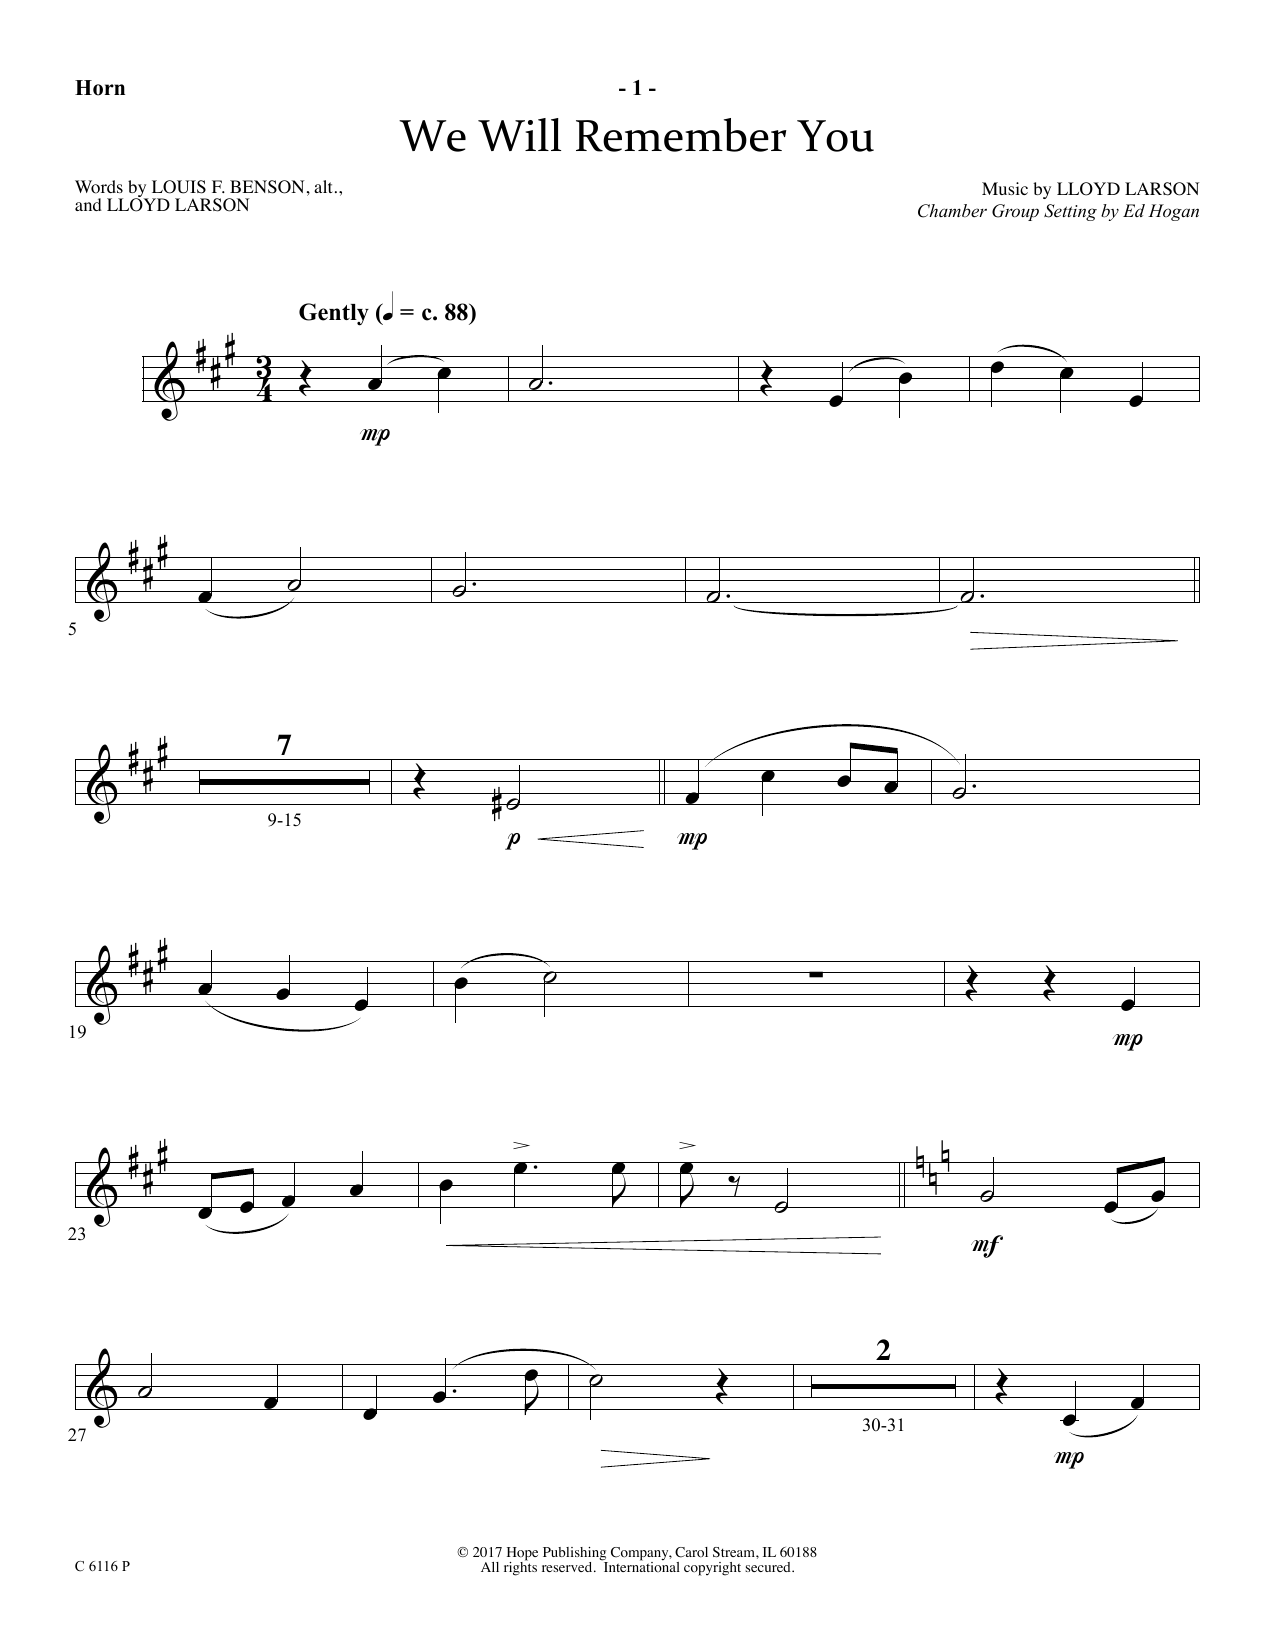 Download Ed Hogan We Will Remember You - F Horn Sheet Music